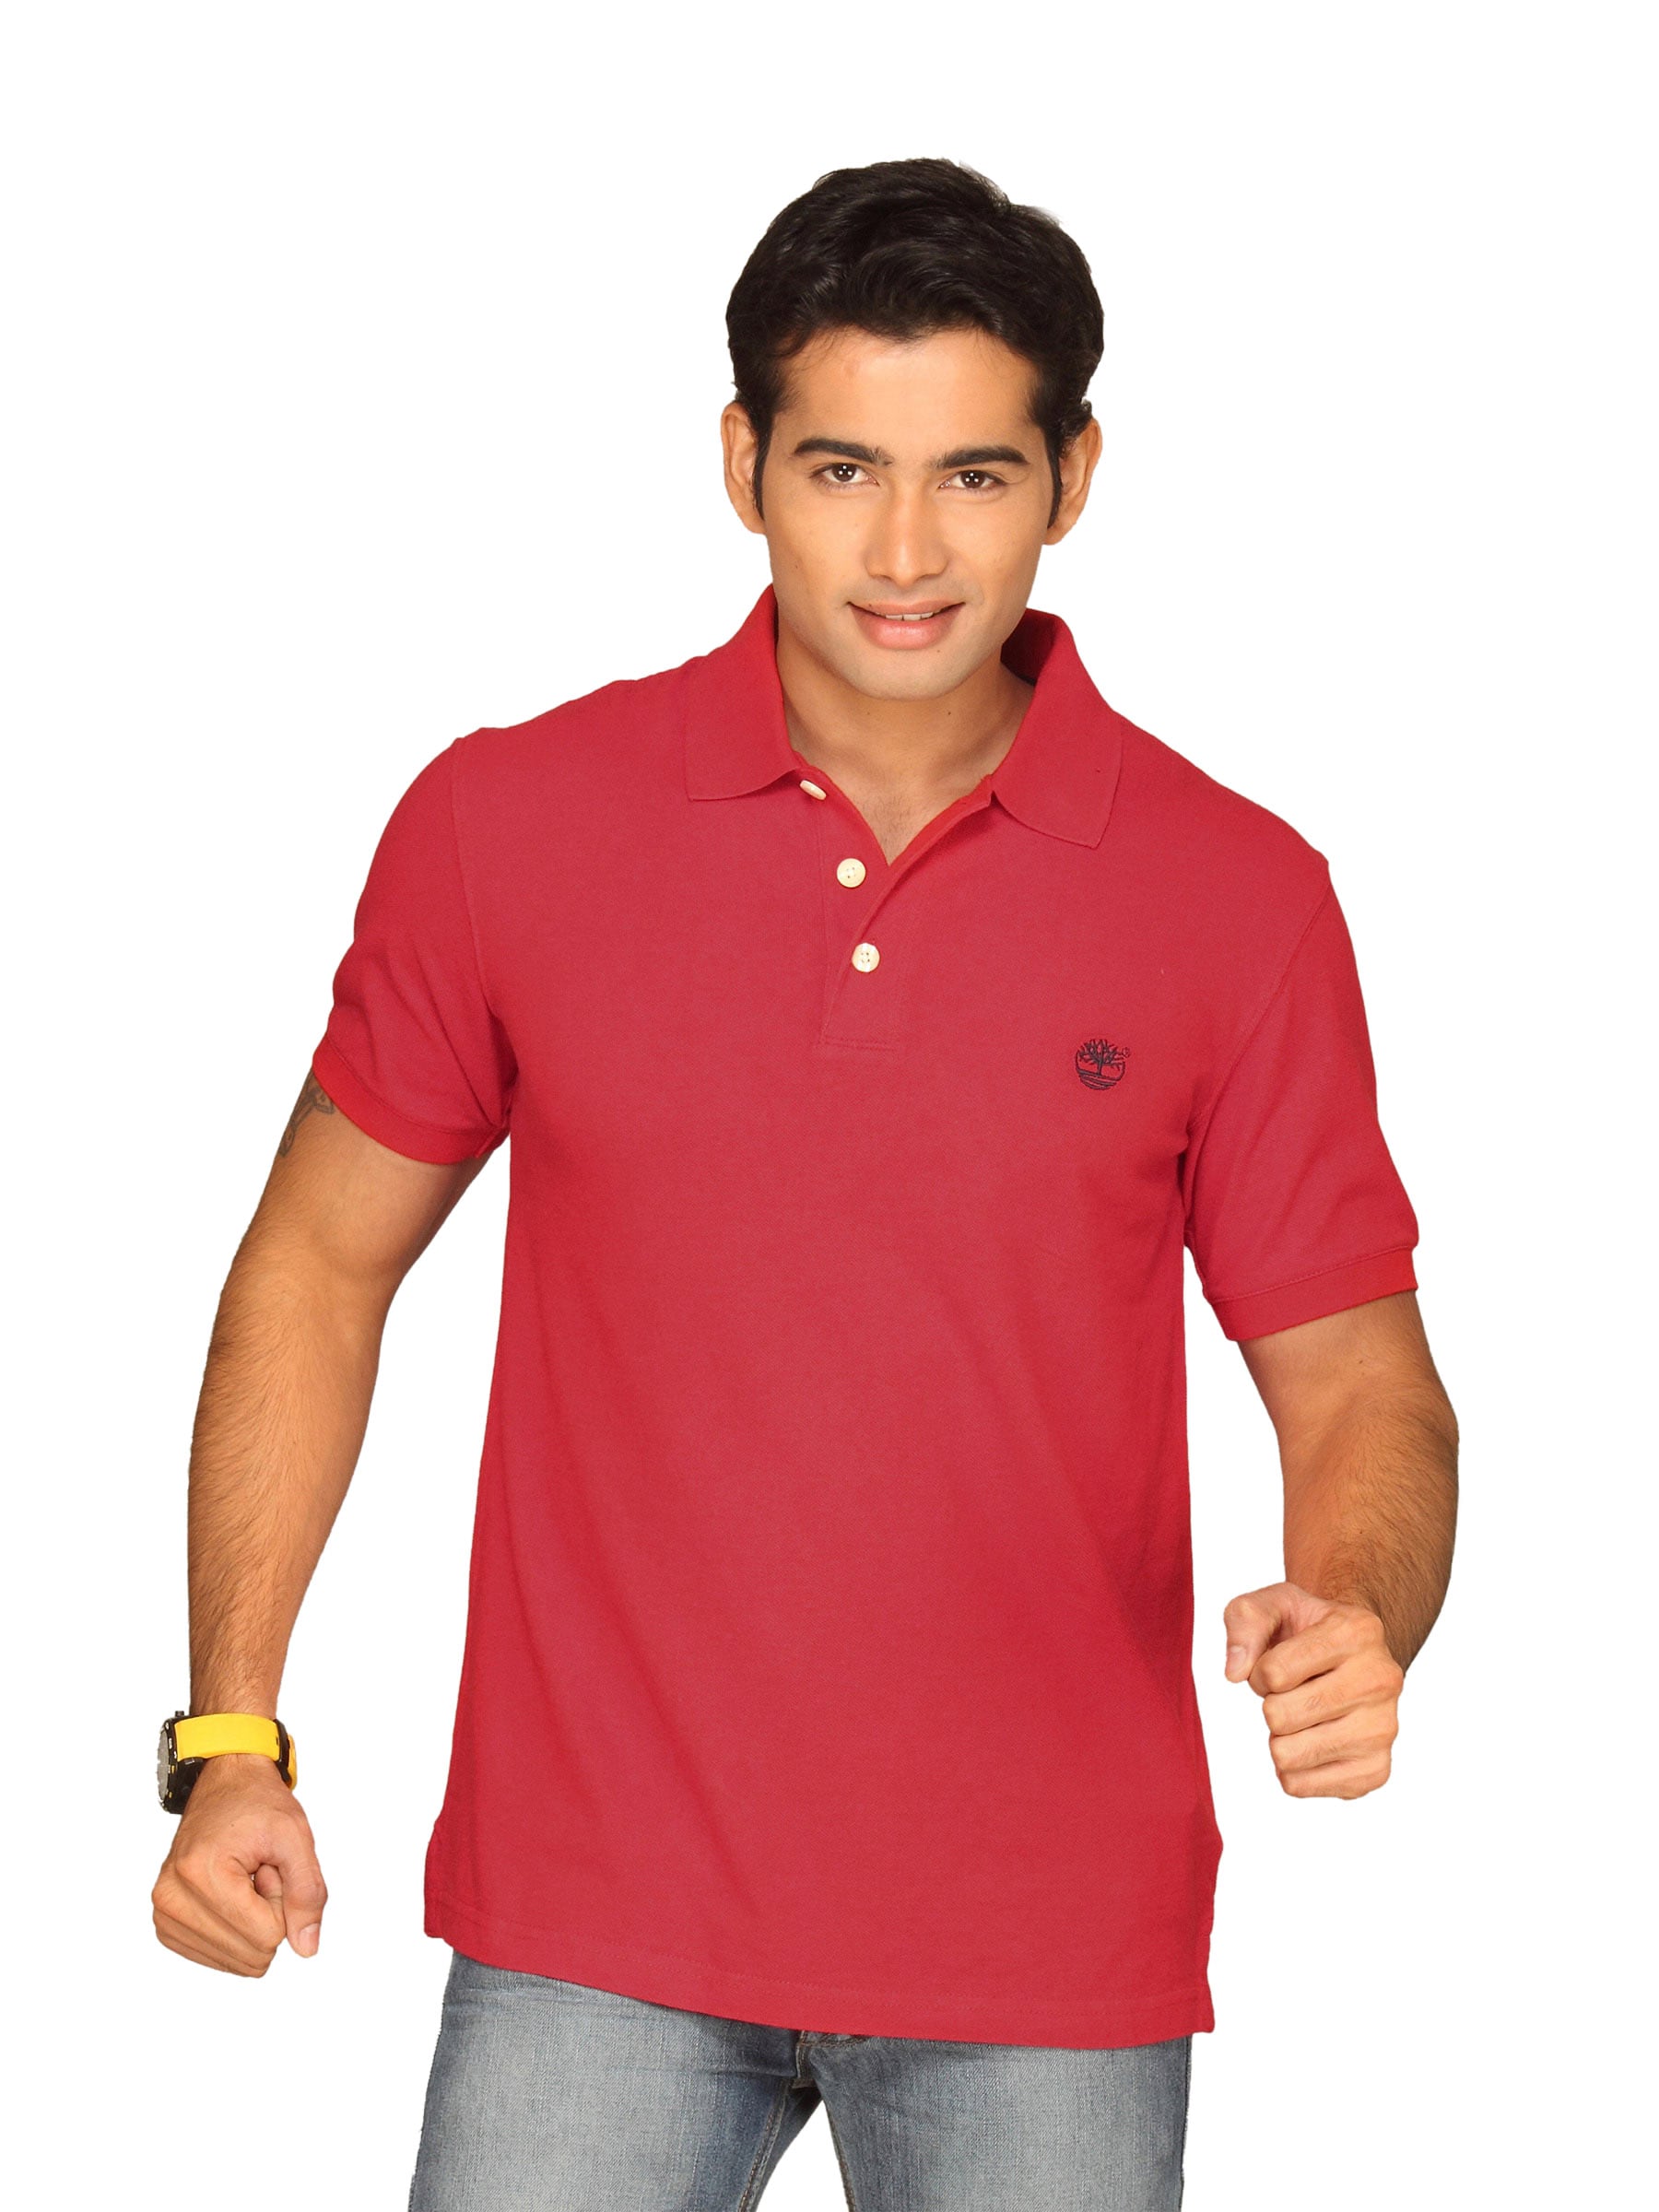 Timberland Men's Pique Polo Red T-shirt